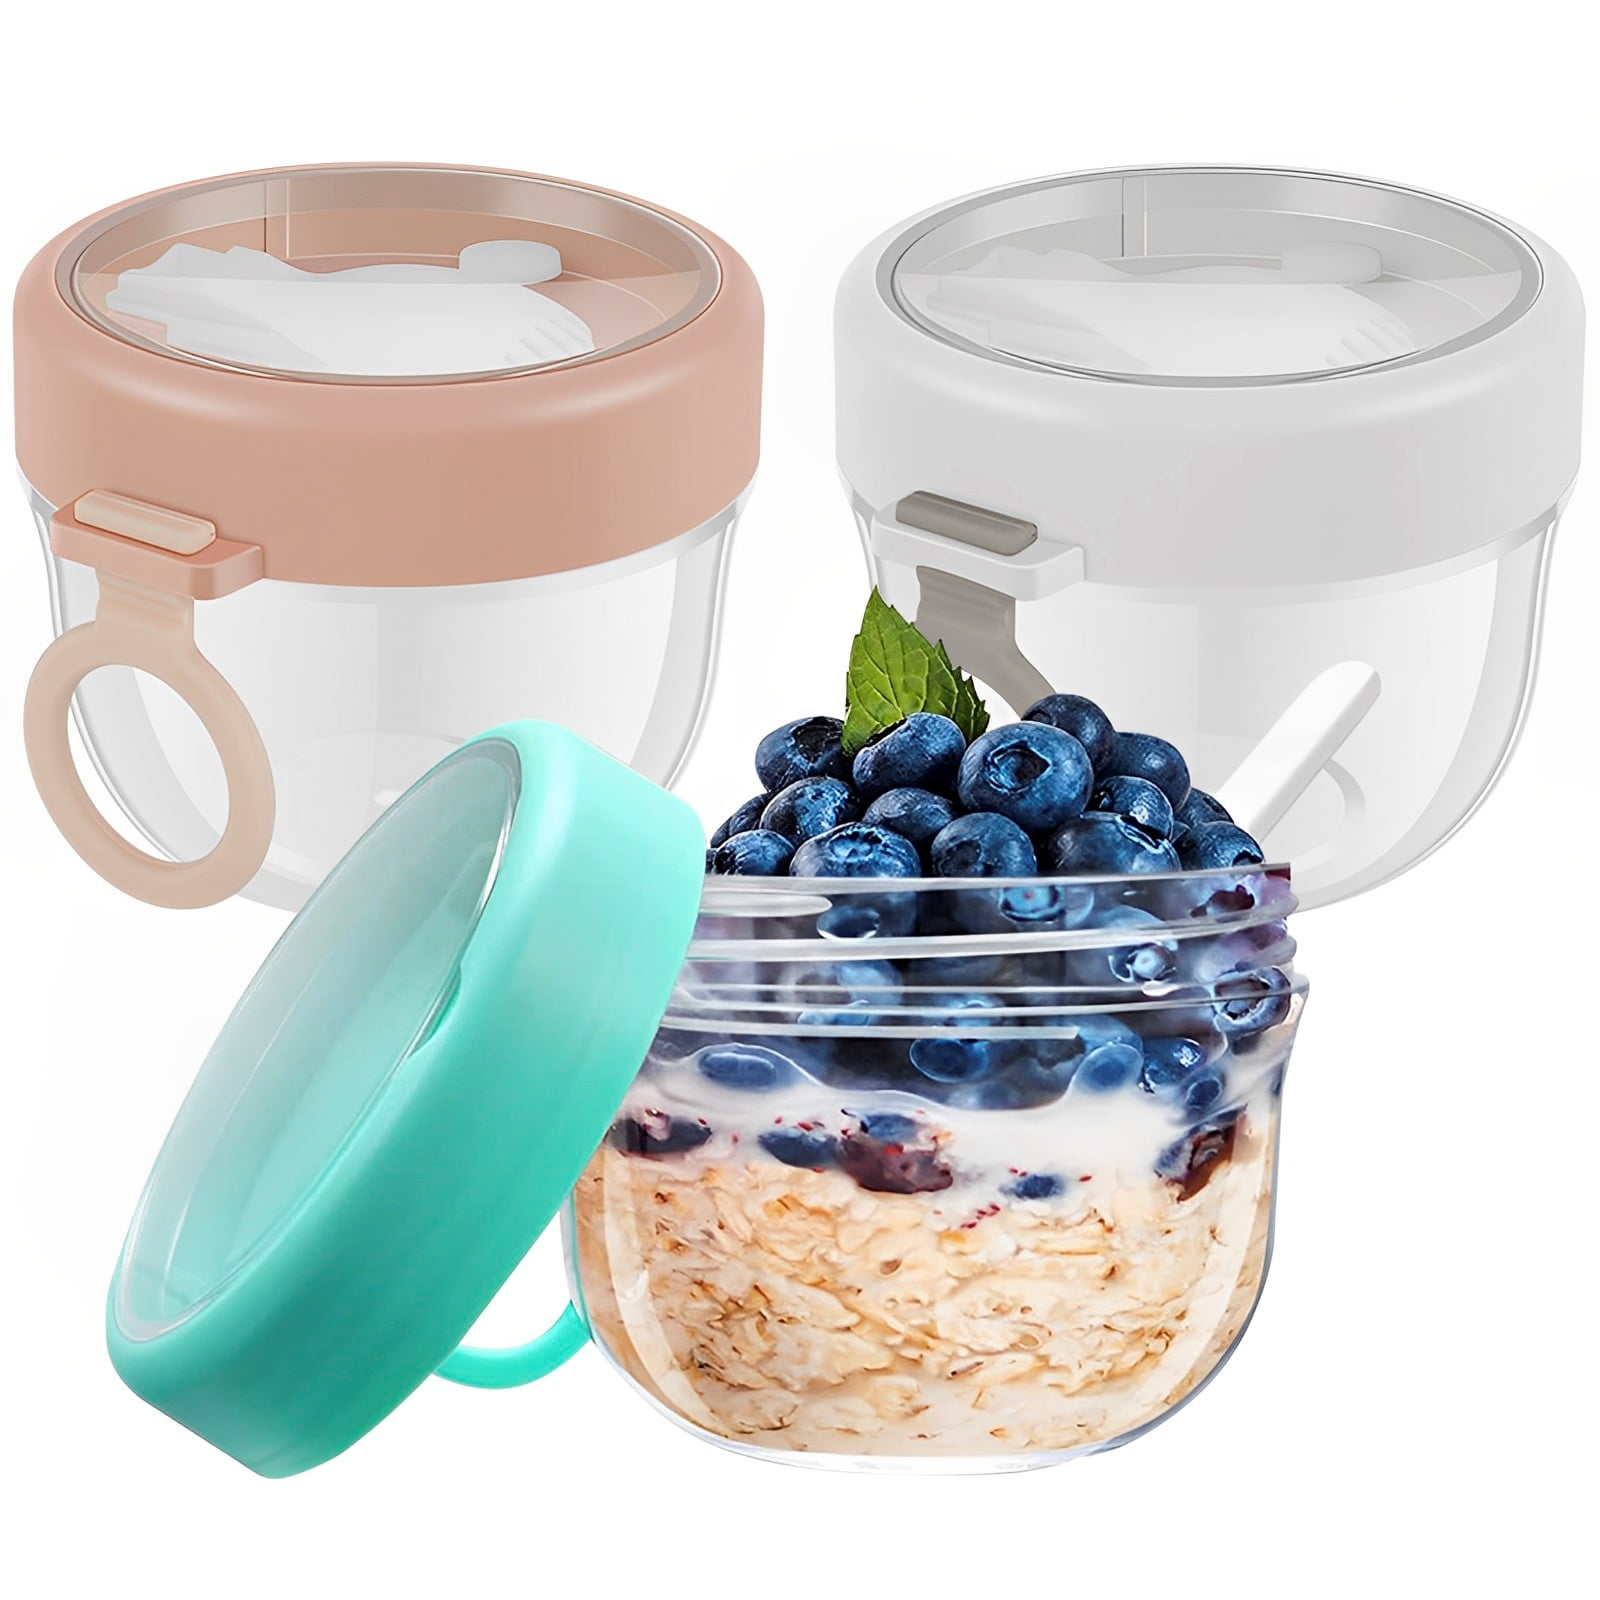 Yogurt Container with Lid and Spoon 2-Tier Cereal Cup,430 ml + 330 ml  Cereal Cup Portable Leak-Proof Insulated Food Container Overnight Oats